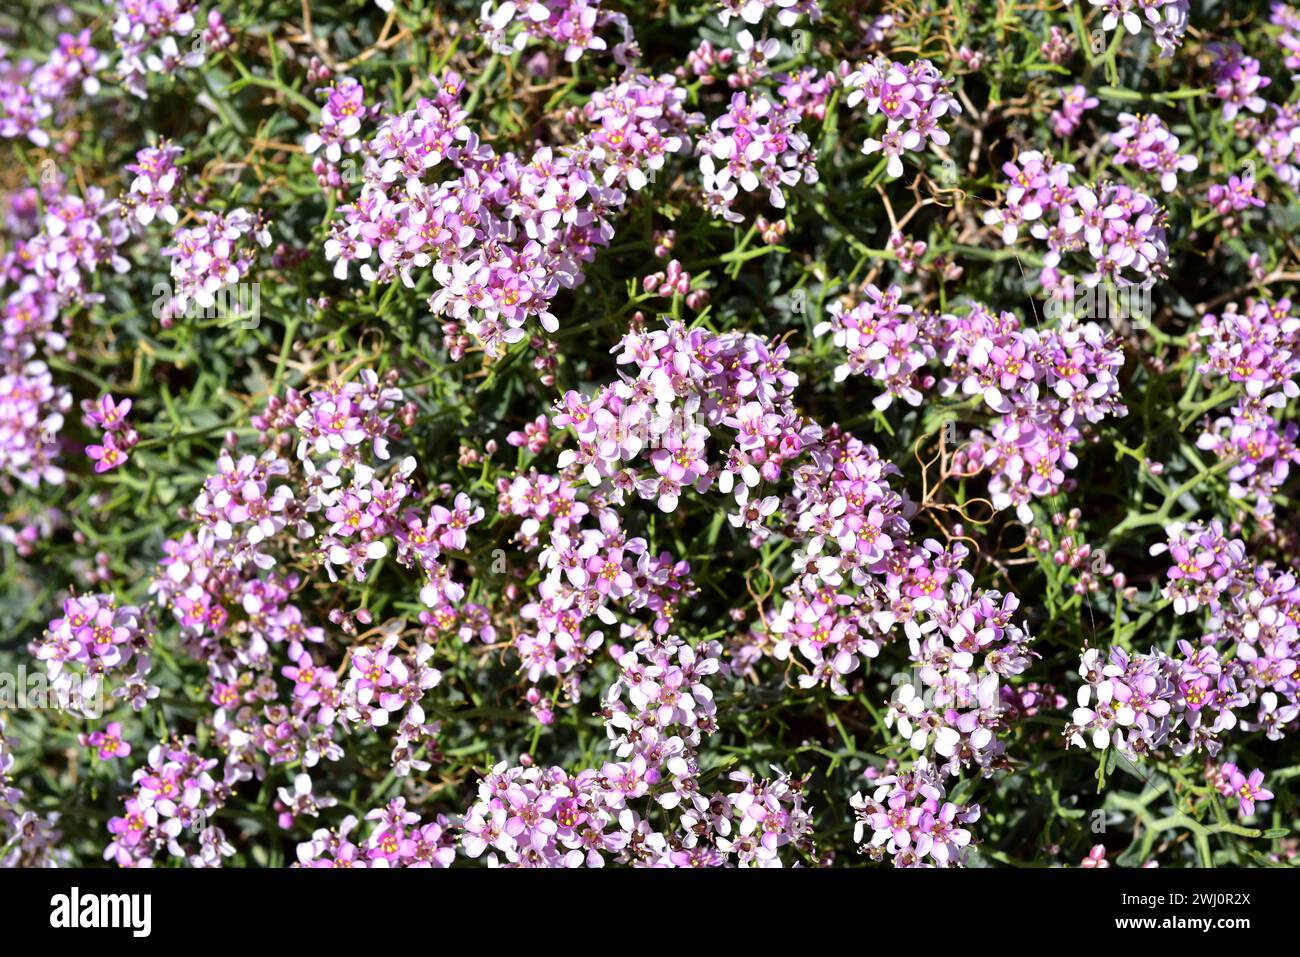 Rascaculos (Hormathophylla spinosa, Alyssum spinosum or Ptilotrichum spinosum) is a spiny cushion-shaped plant native to western Mediterranean Basin. Stock Photo